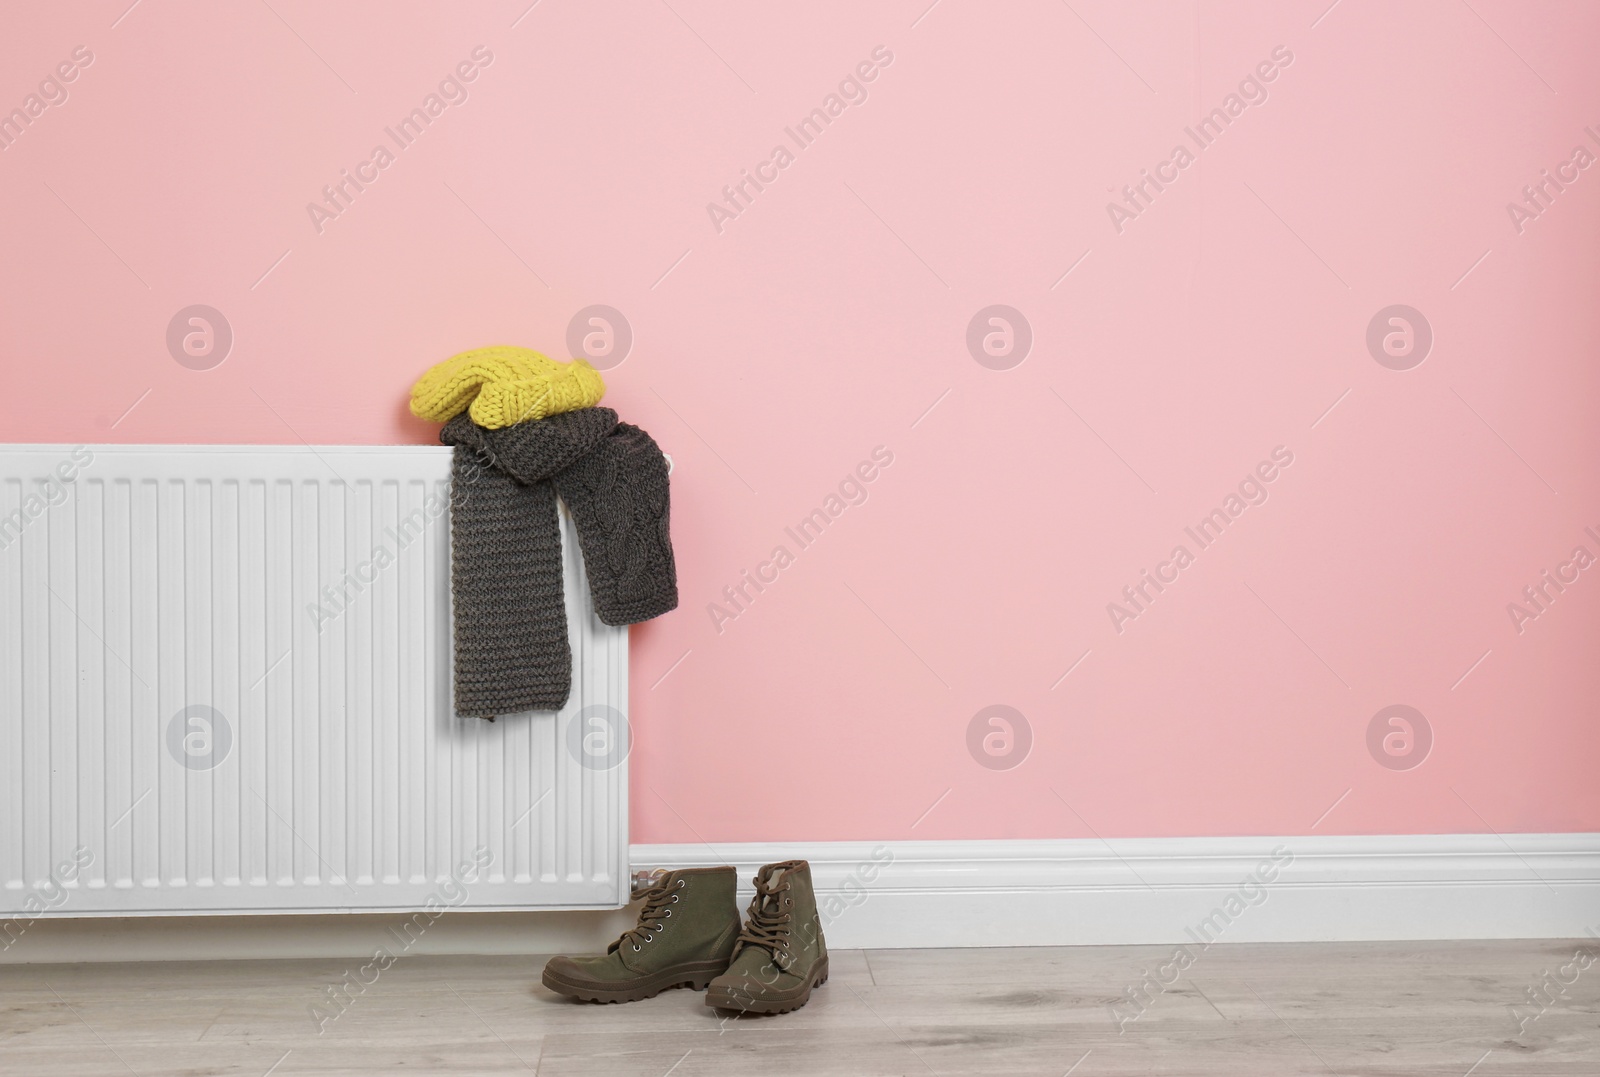 Photo of Heating radiator with knitted cap, scarf and shoes near color wall. Space for text